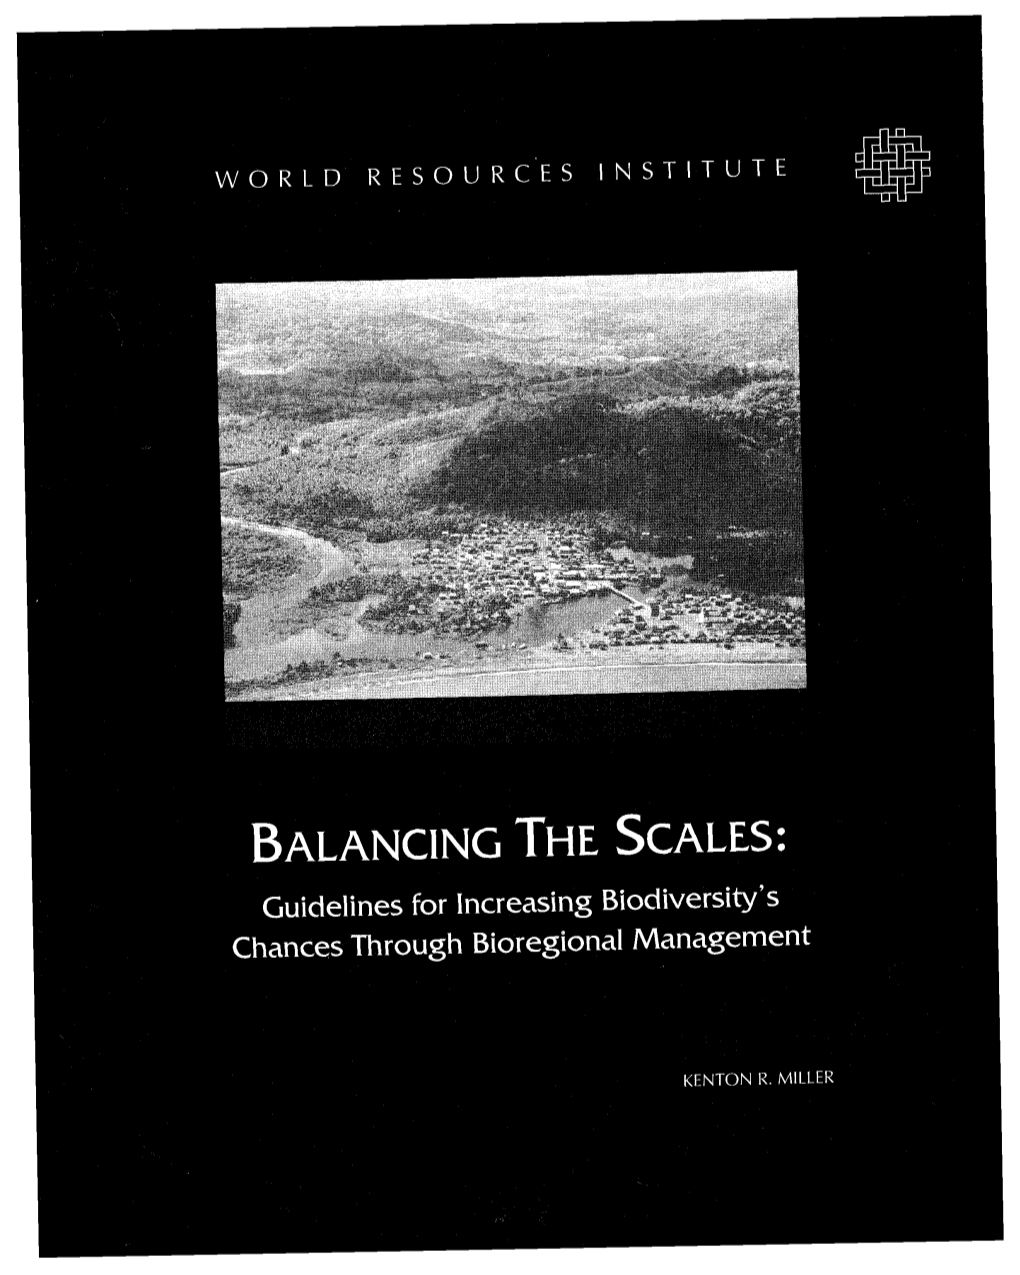 BALANCING the SCALES: Guidelines for Increasing Biodiversity's Chances Through Bioregional Management